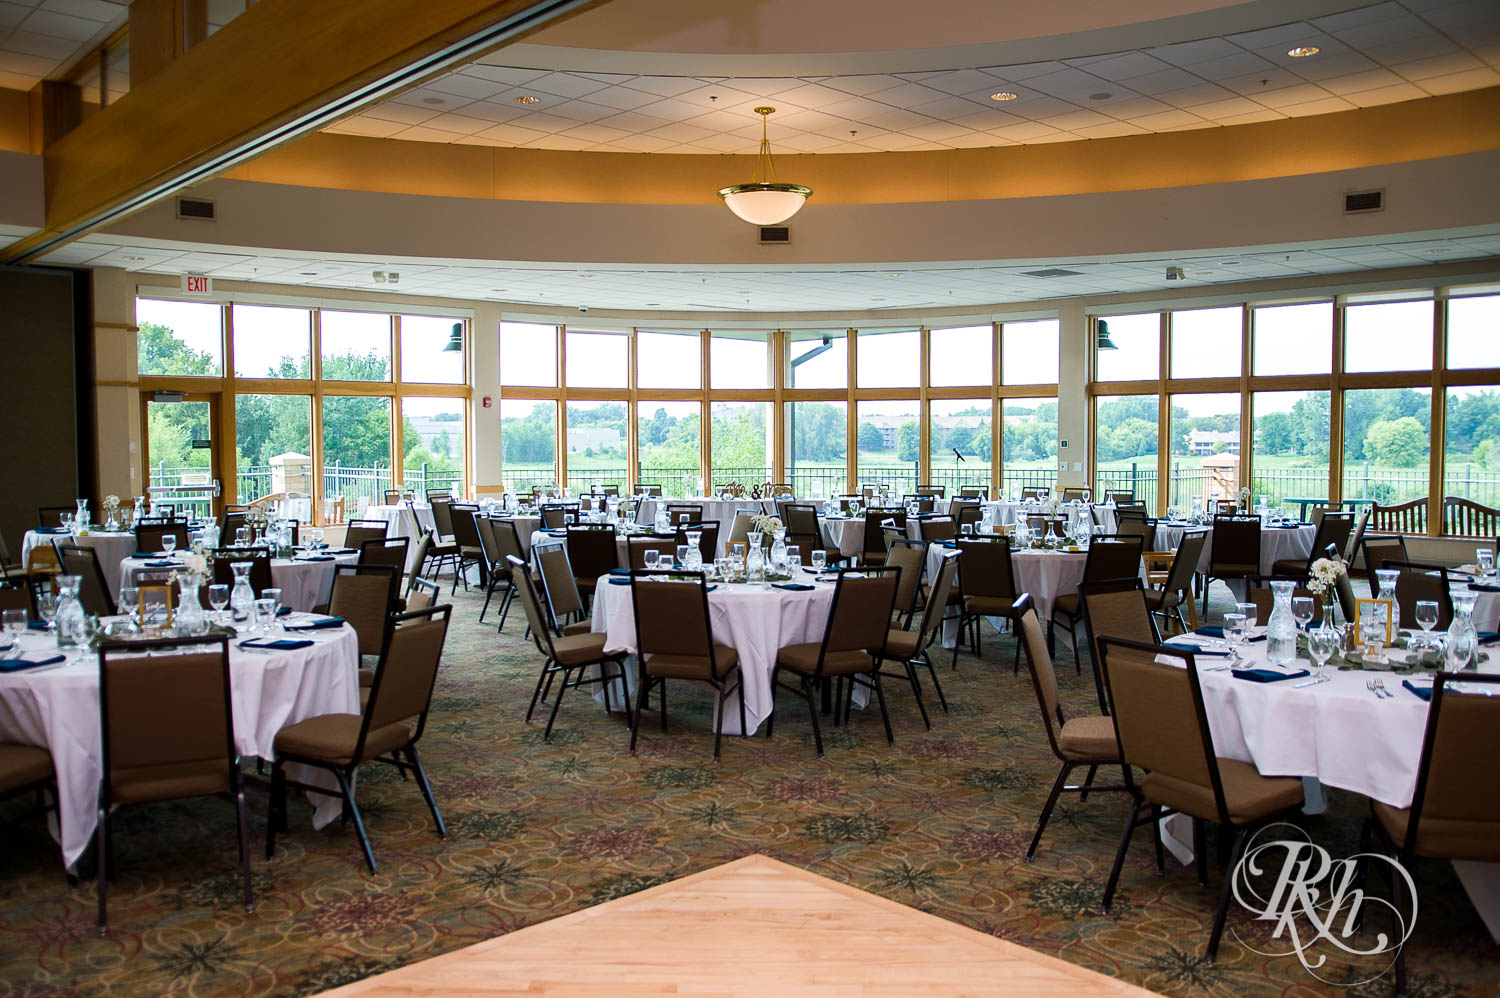 Indoor wedding reception setup at Plymouth Creek Center in Plymouth, Minnesota.